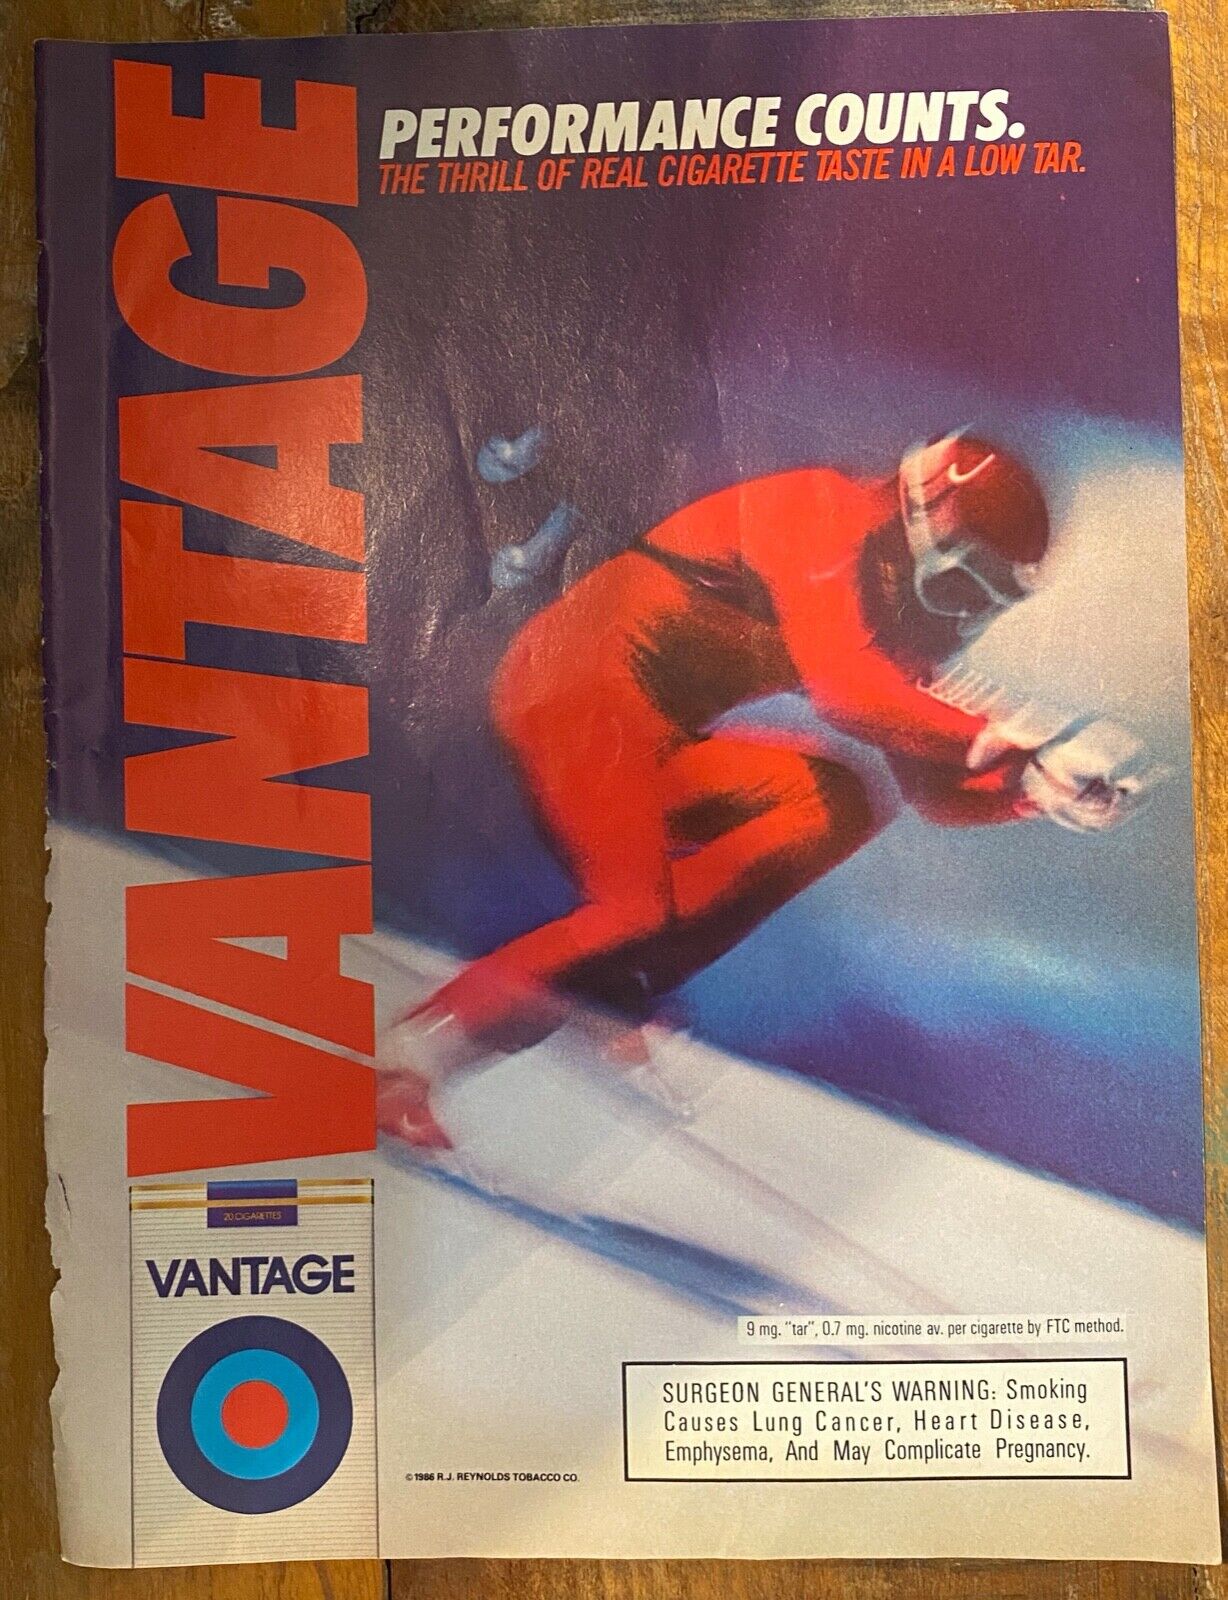 VANTAGE Print Ad from February 1986 Edition of HOT ROD Magazine